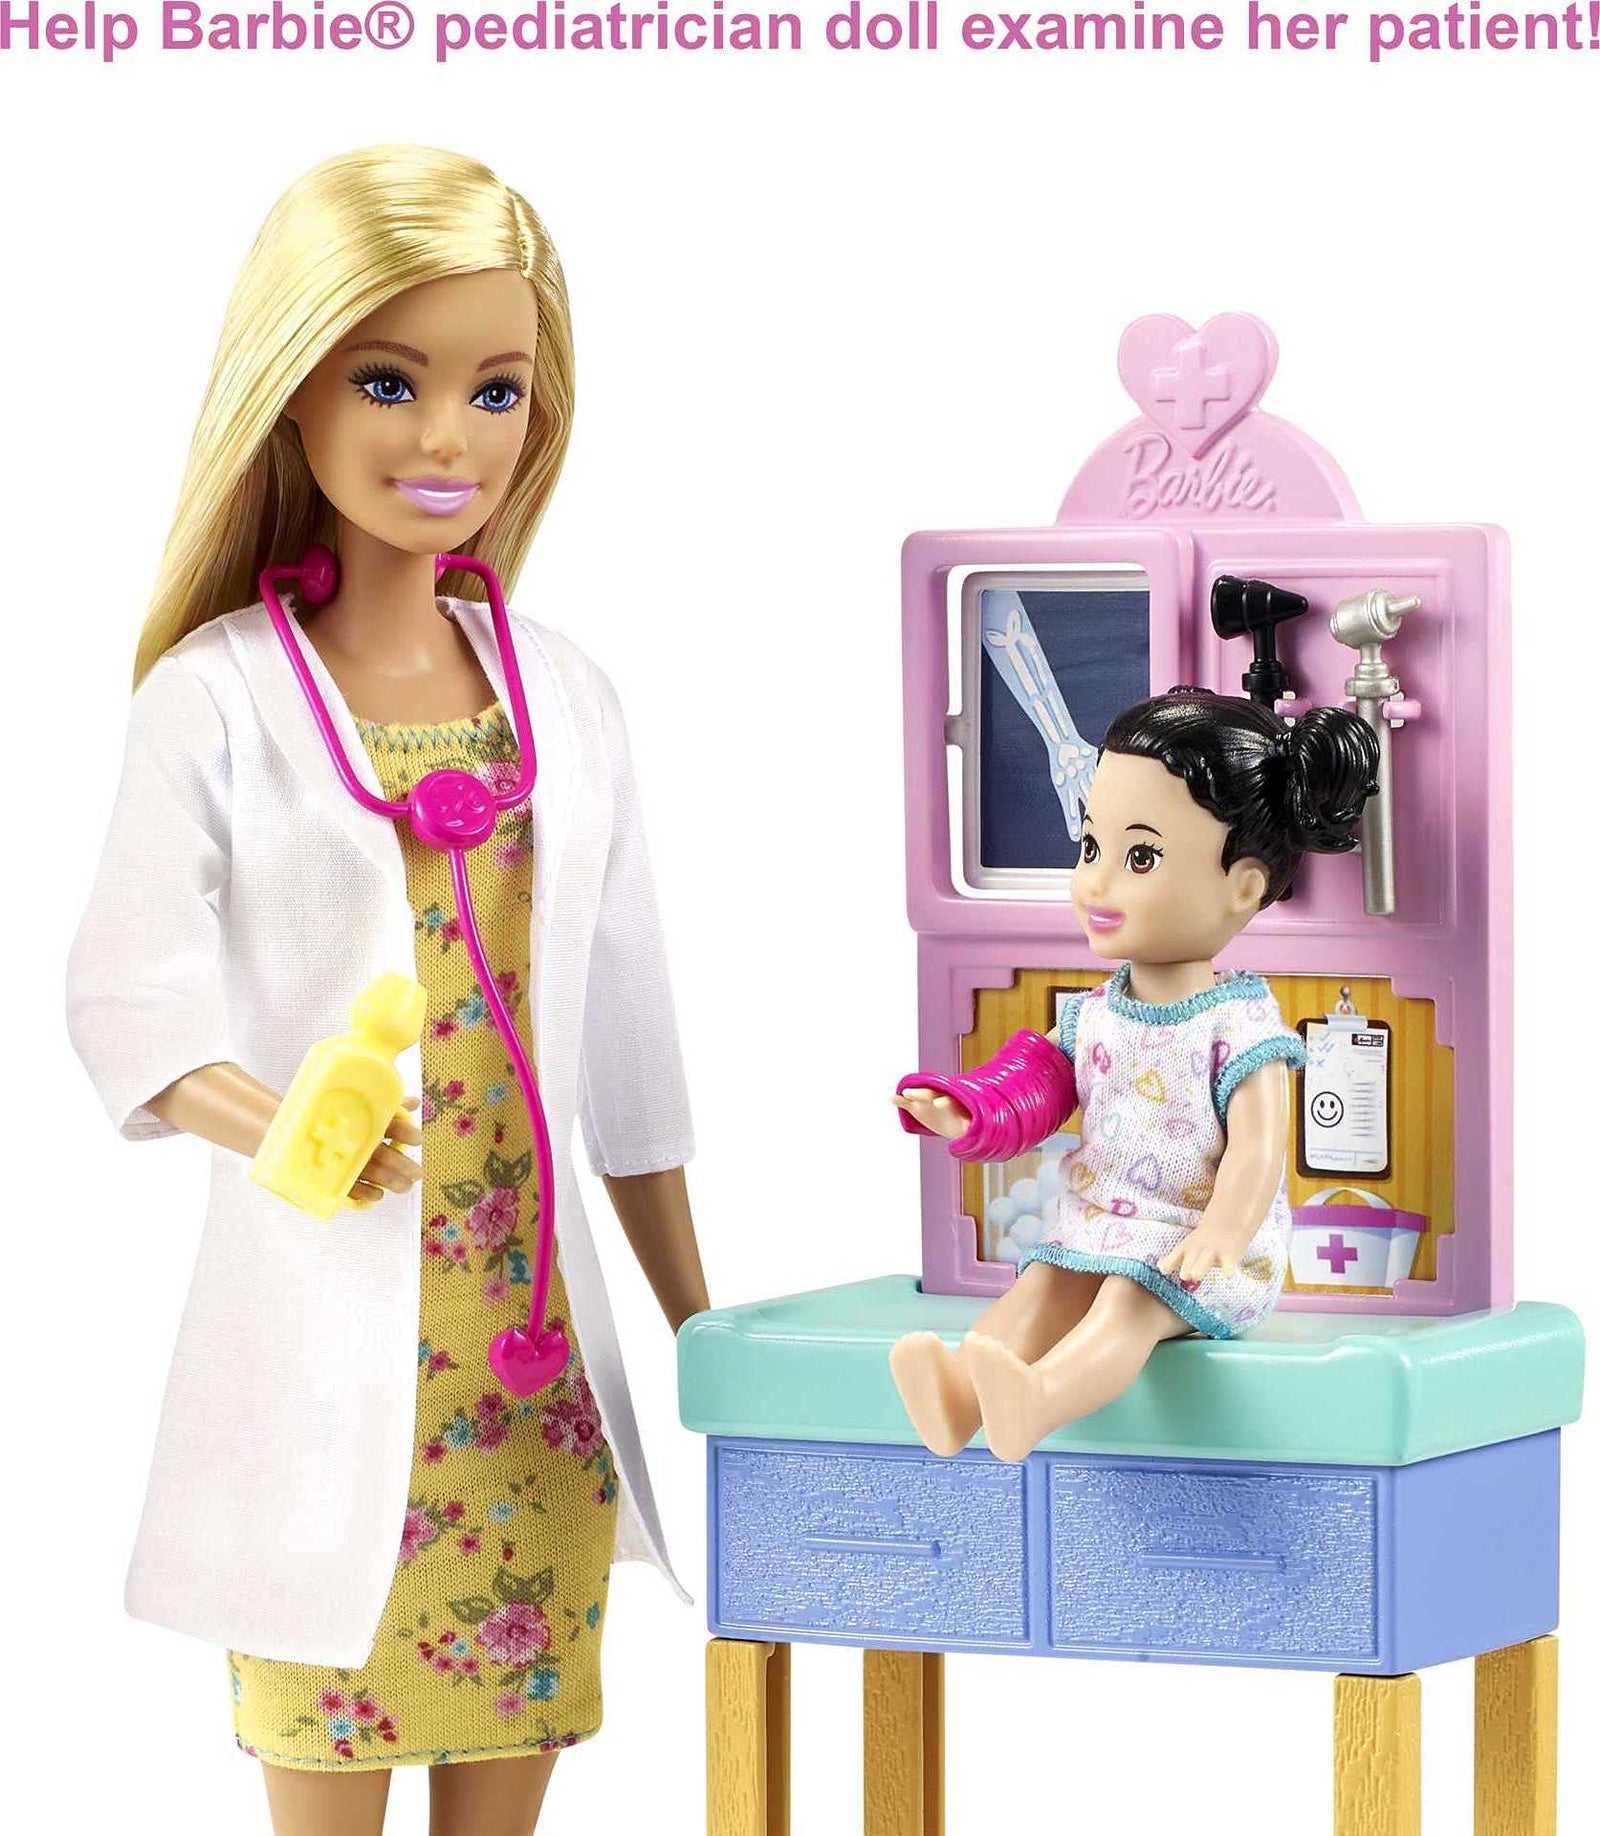 Barbie Pediatrician Playset, Blonde Doll (12-in), Exam Table, X-ray, Stethoscope, Tool, Clip Board, Patient Doll, Teddy Bear, Great Gift for Ages 3 Years Old & Up